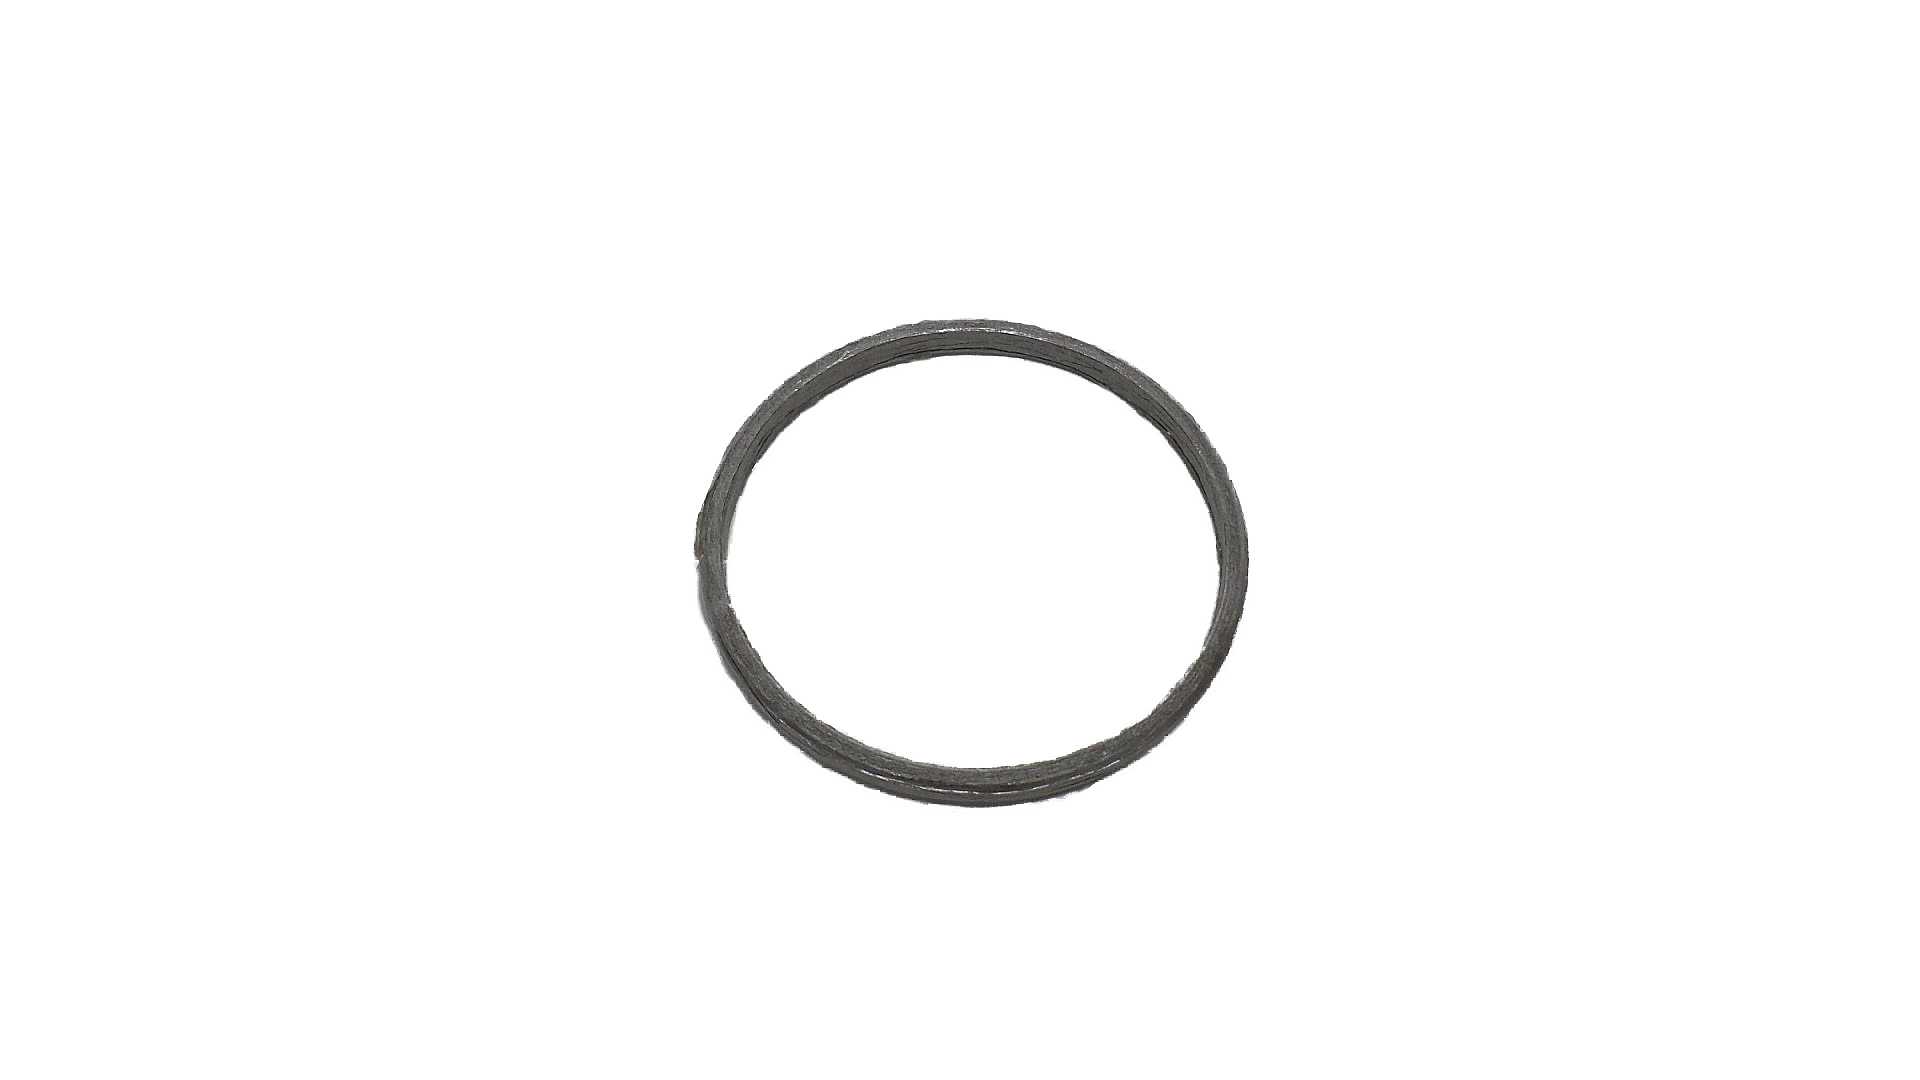 2.0L TSI EA888 Gen.3 MQB Gasket / combustion ring for turbocharger